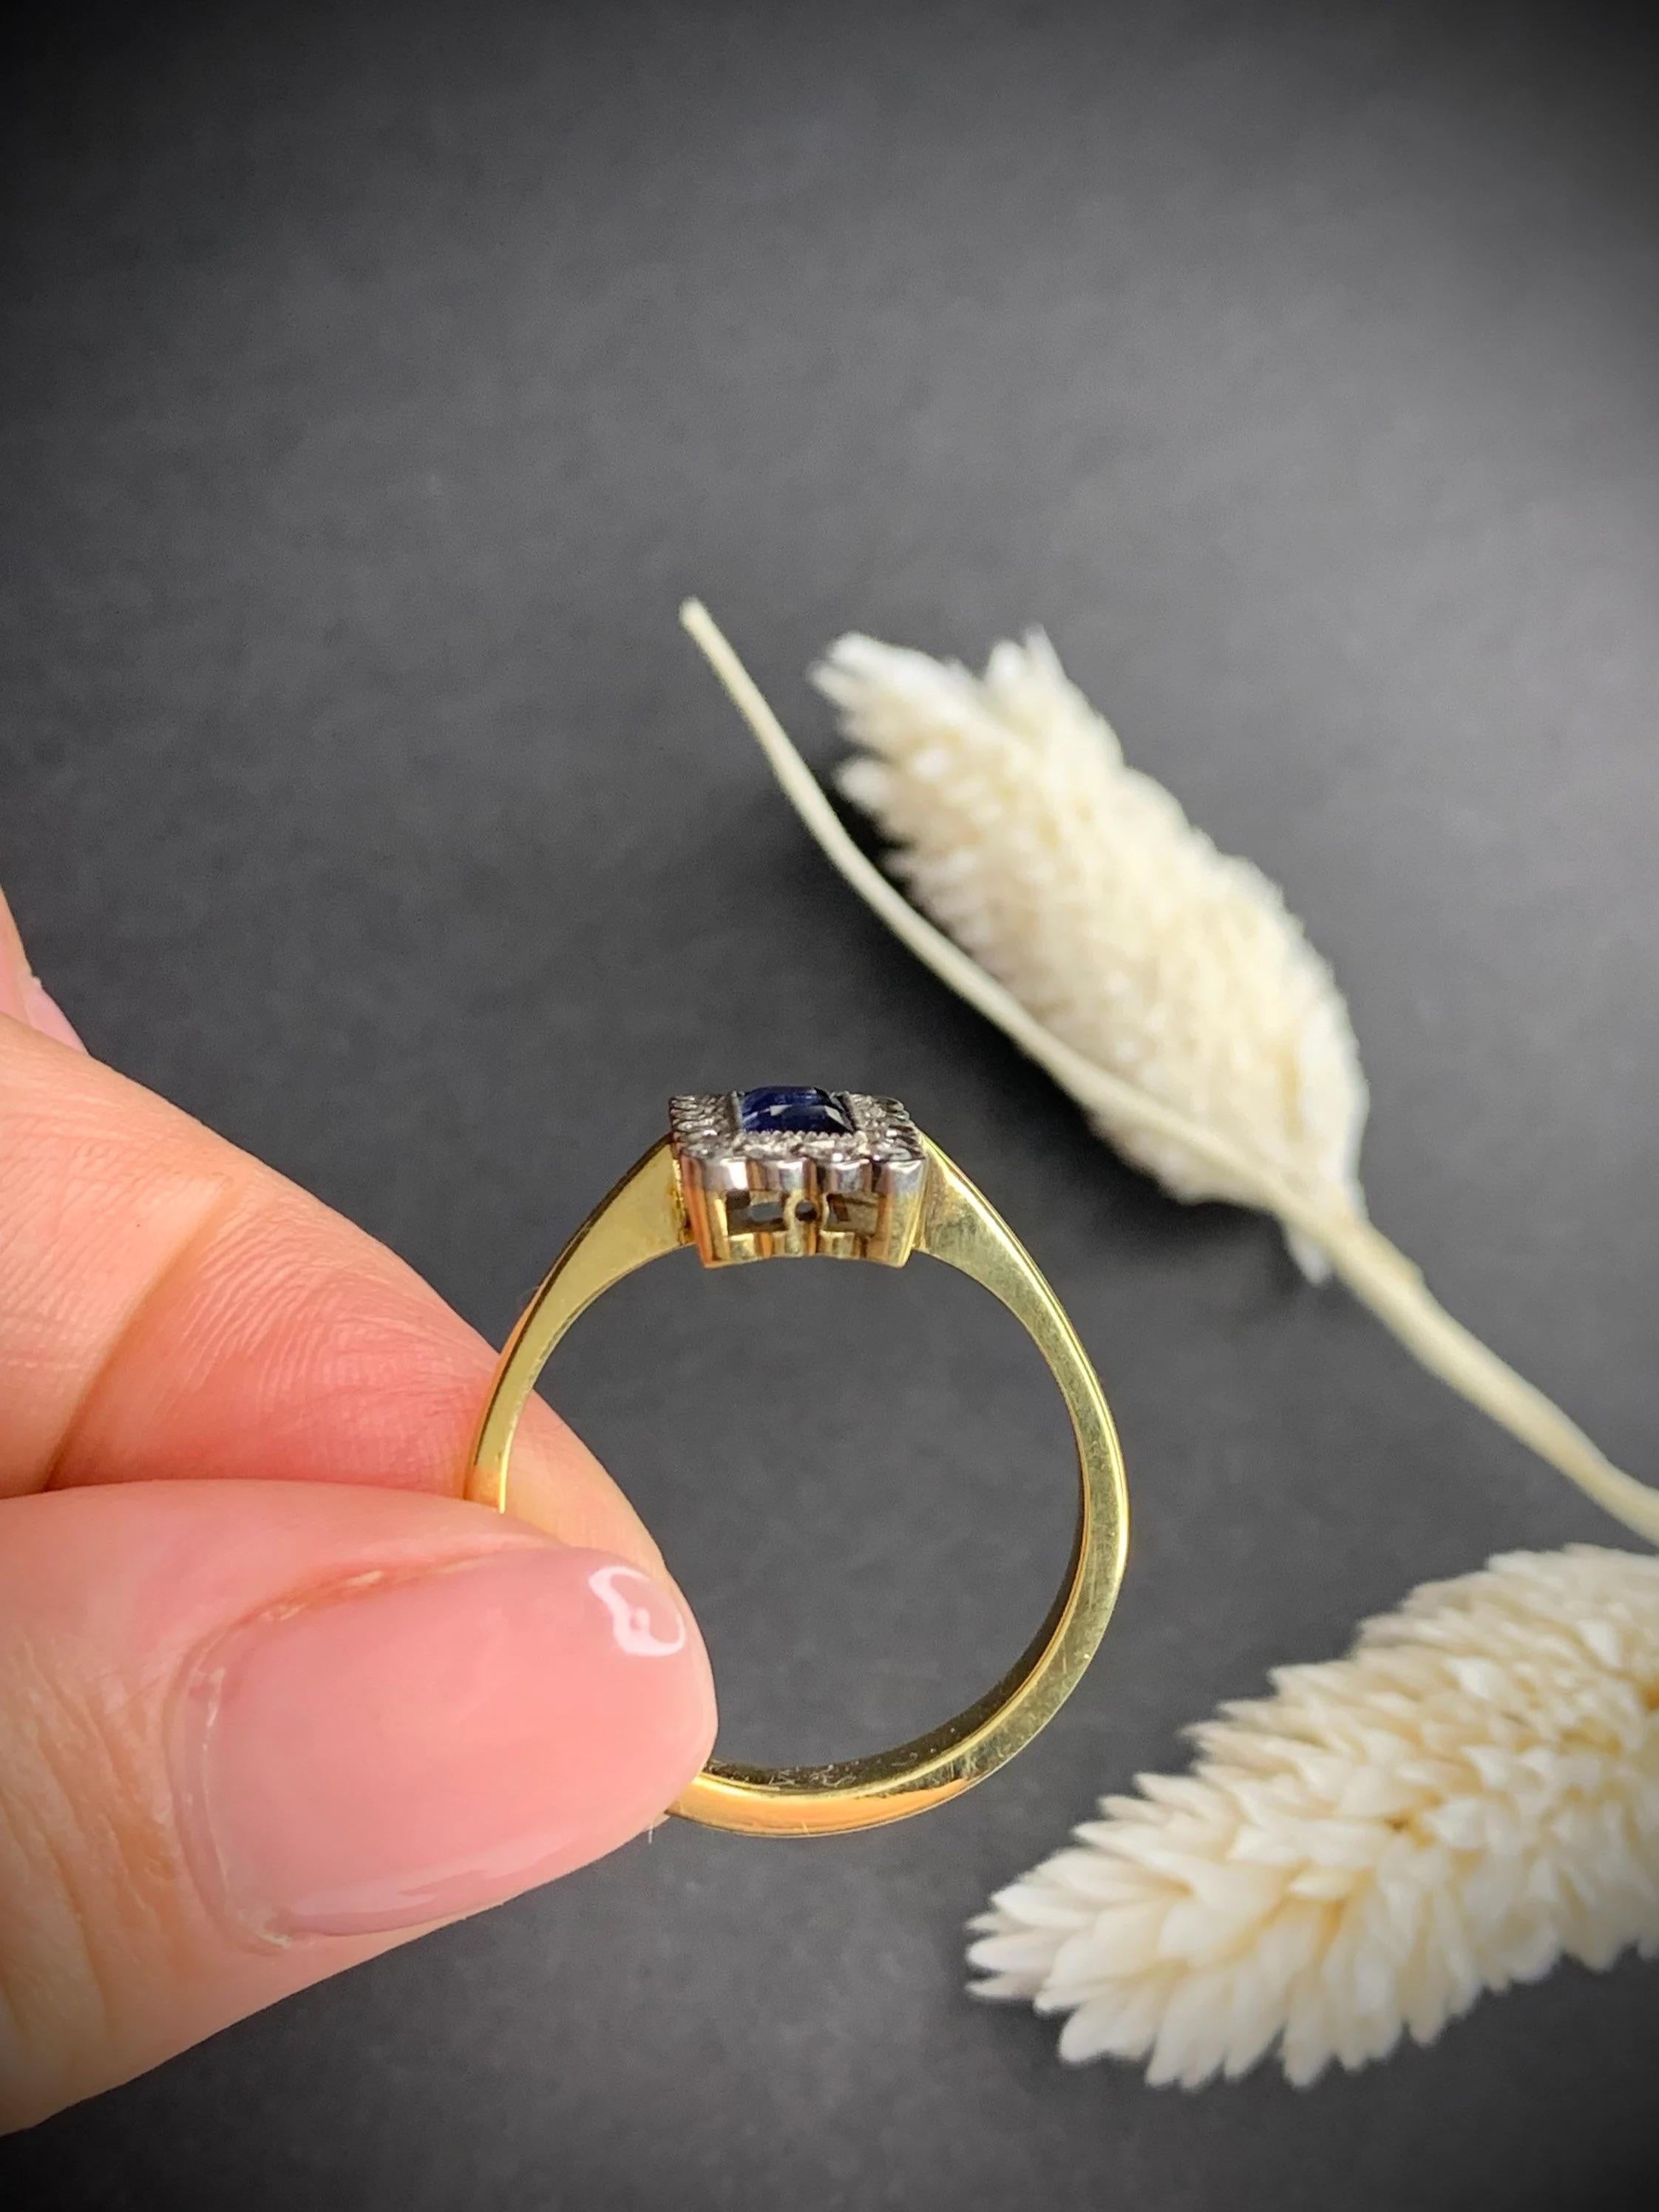 Art Deco Sapphire & Diamond Ring 

18ct Gold & Platinum 

Fabulous Original Art Deco Ring Set with Calibrated Sapphires & Old Cut Diamonds in a Milgraine Setting

The Rings Shank Has Been Replaced 

Face of The Ring Measures 15mm x 12mm

UK Size Q